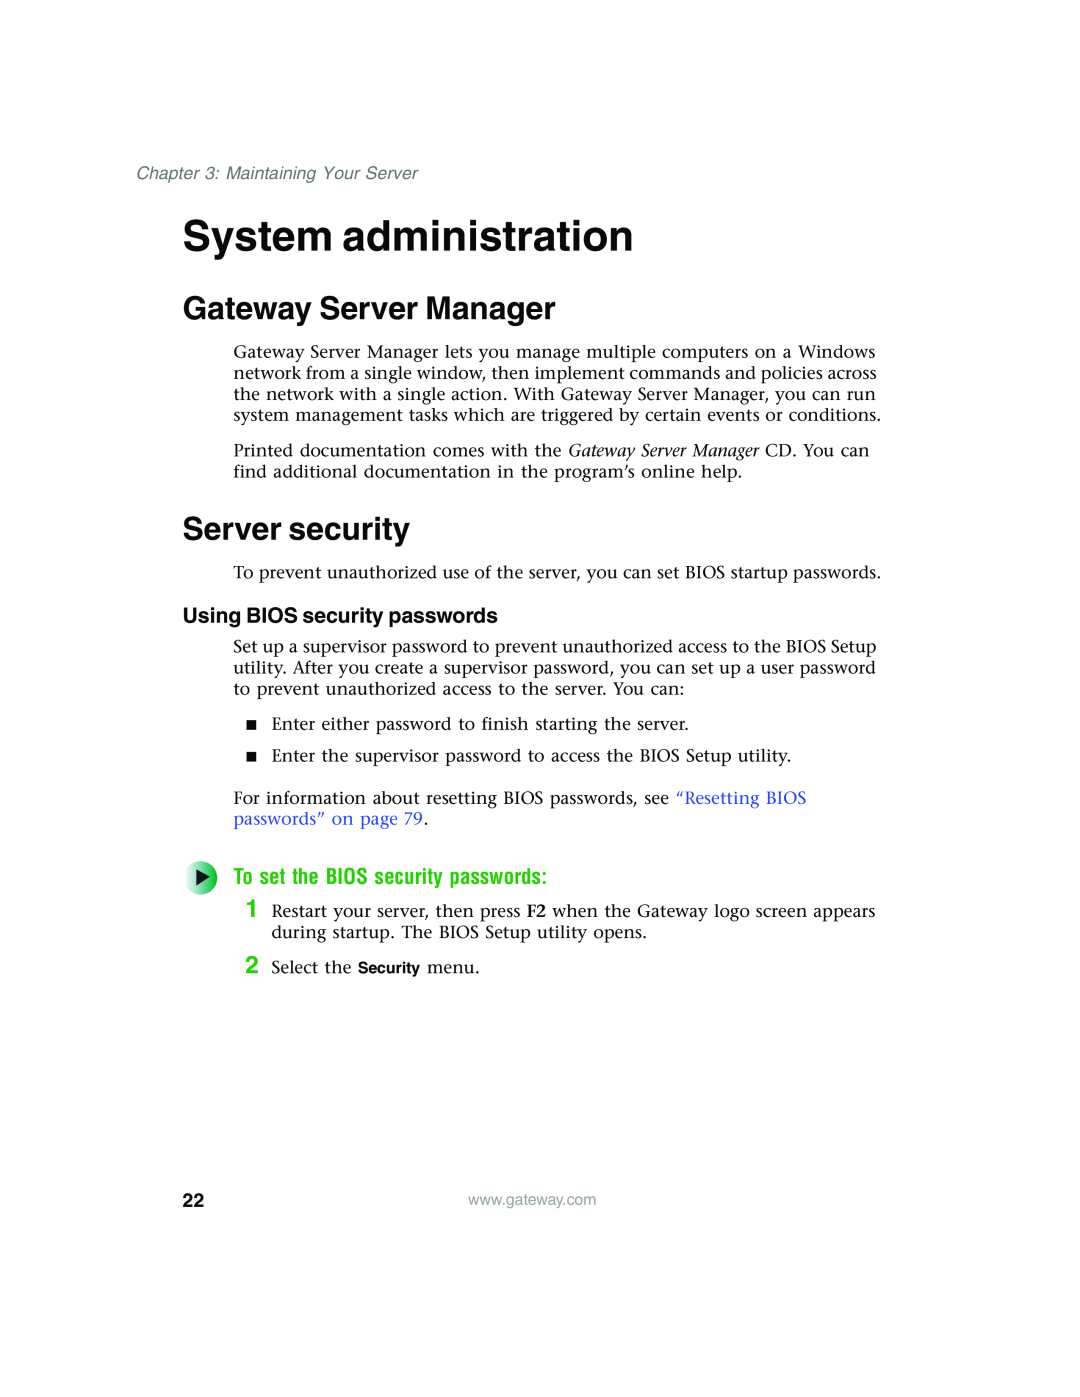 Gateway 980 manual System administration, Gateway Server Manager, Server security, Using BIOS security passwords 